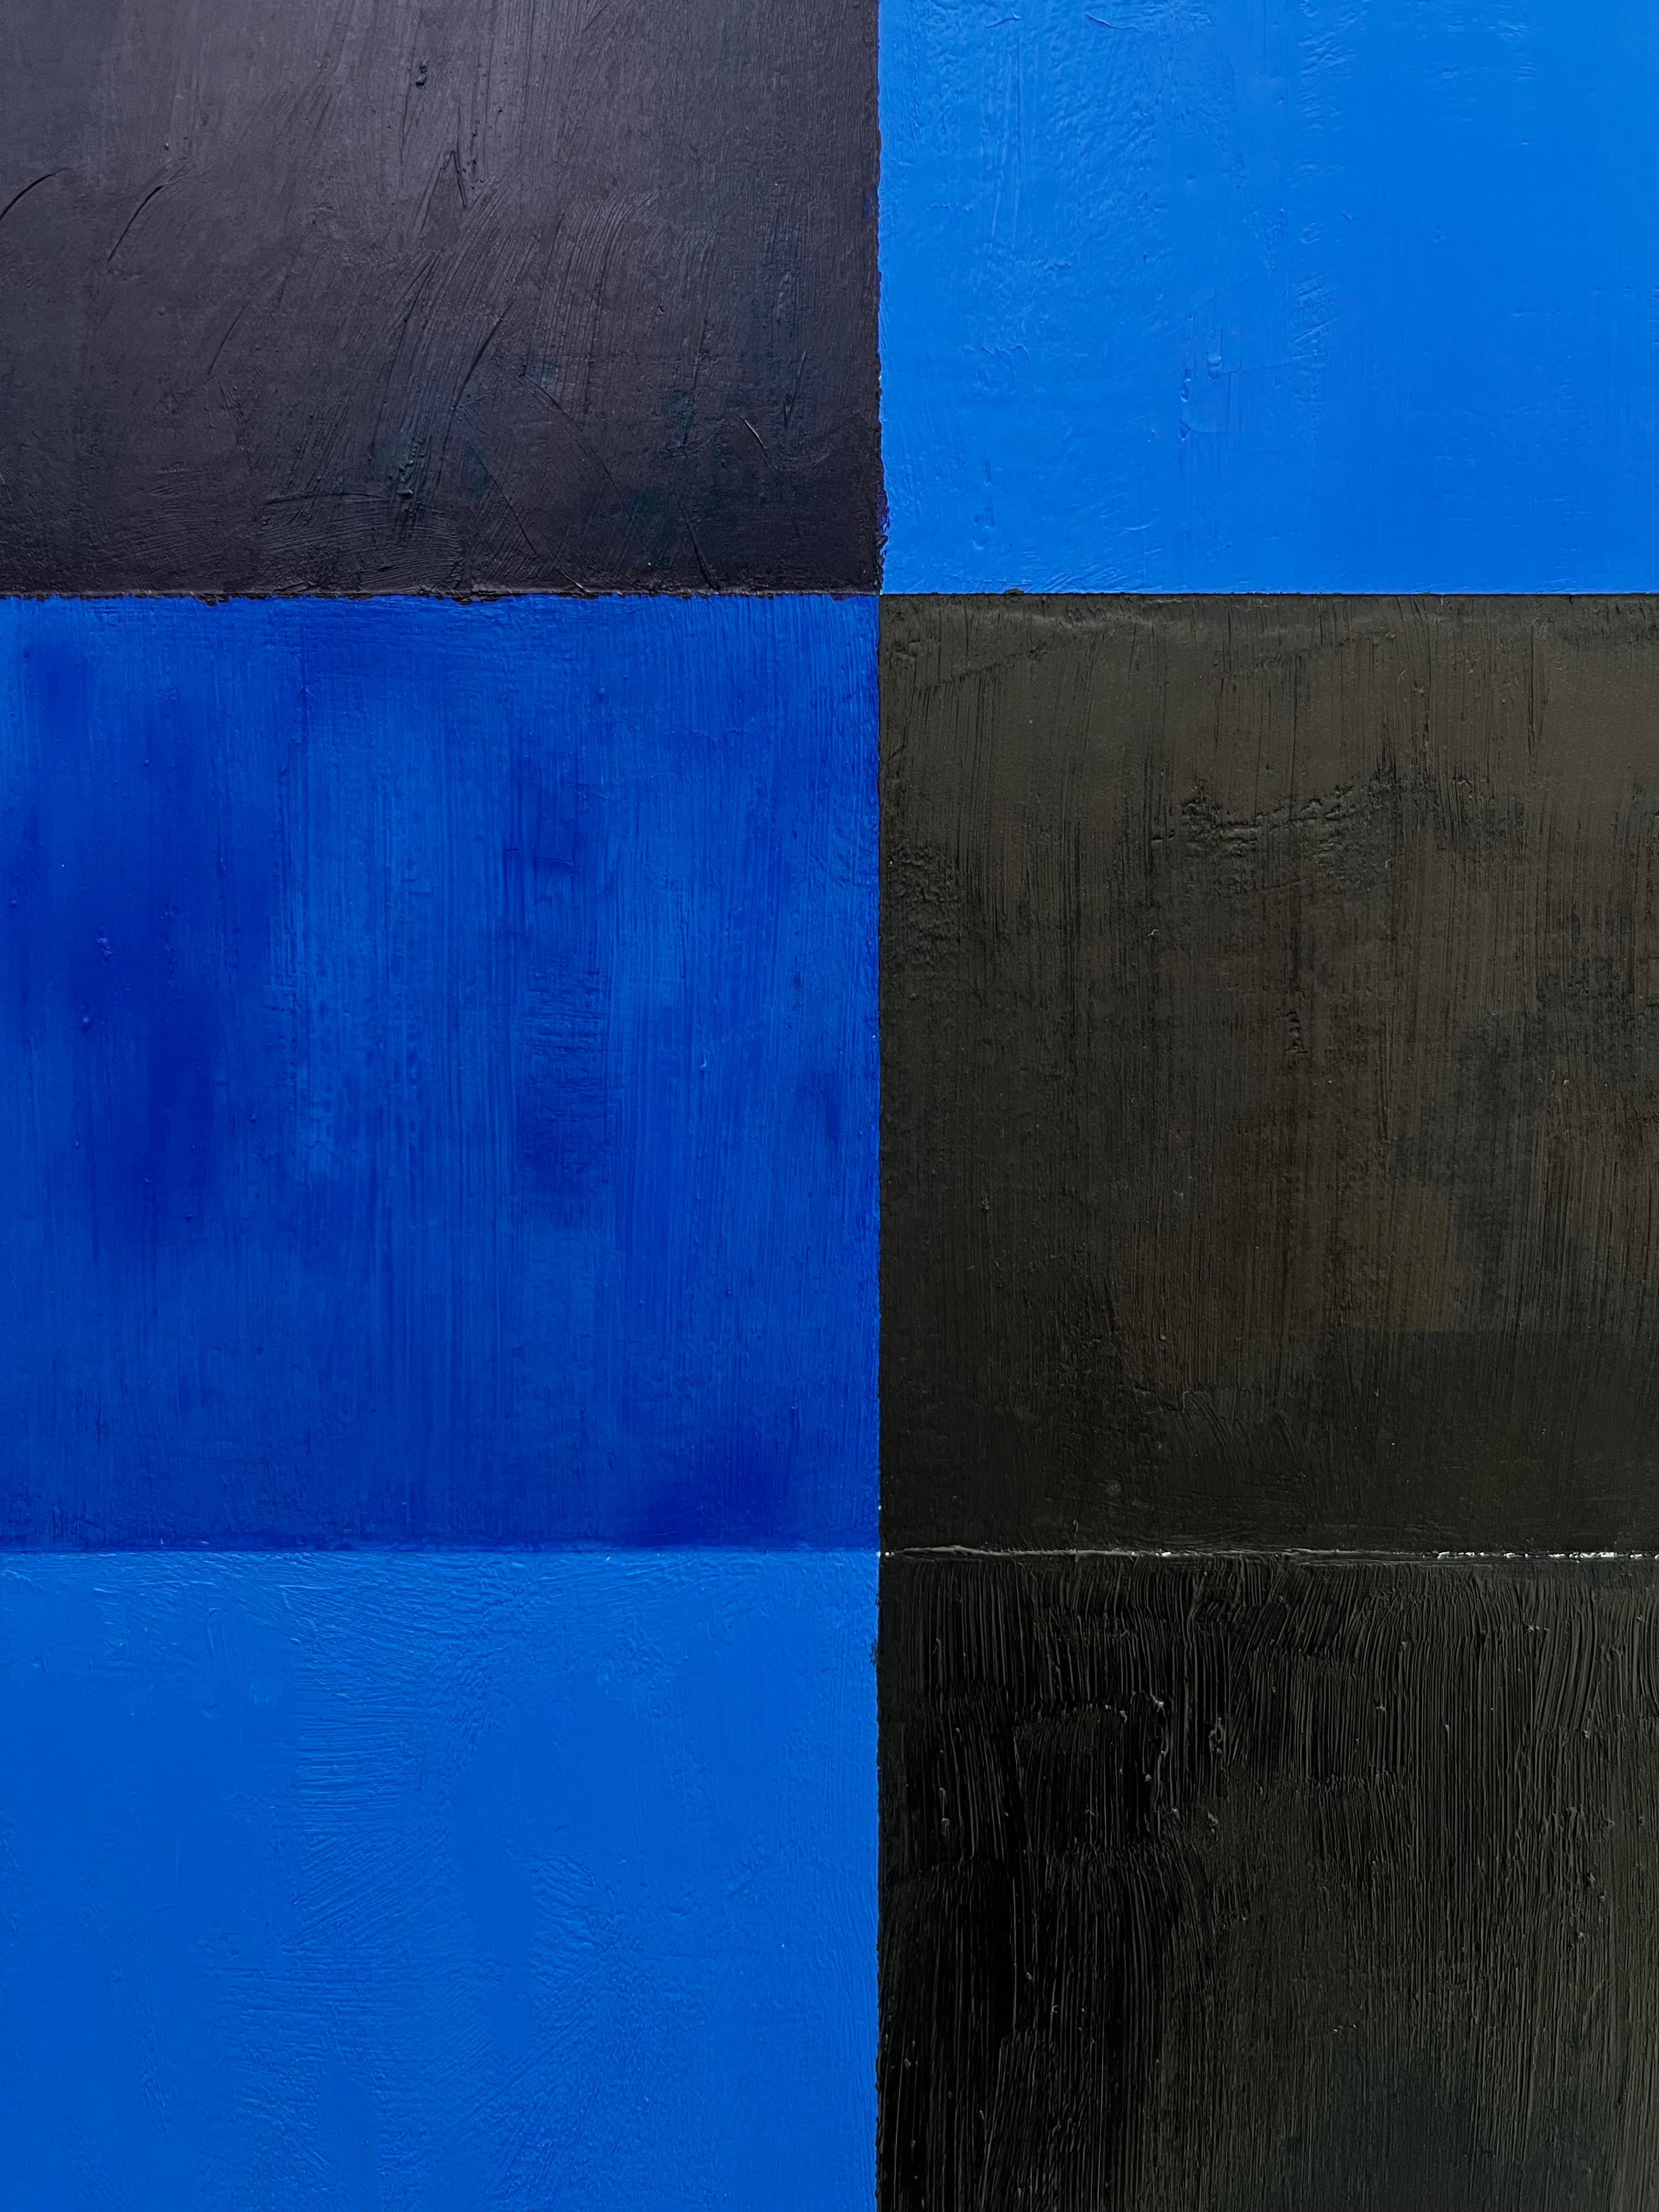 Using pure oil paint, which gives the artwork its unique texture, the artist manages to use two particularly difficult colors to work with: black and blue. 

This artwork is part of the exhibition “Kind of Blue, Kind of Black”, which is an